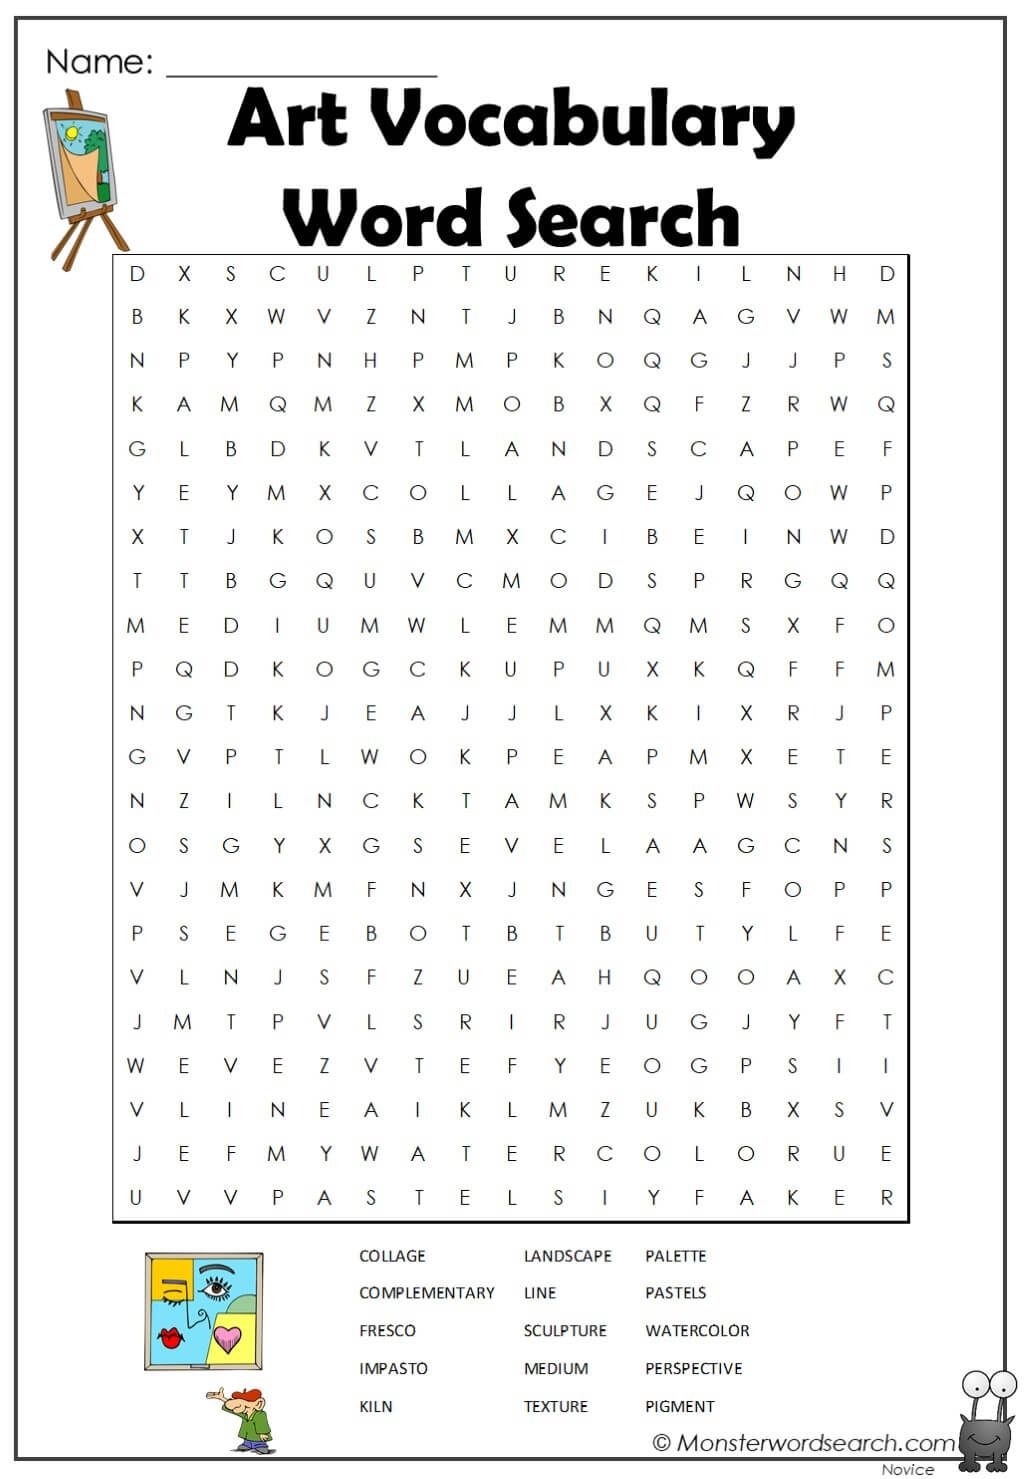 Art Vocabulary Word Search Vocabulary Words English Vocabulary Words Free Printable Word Searches